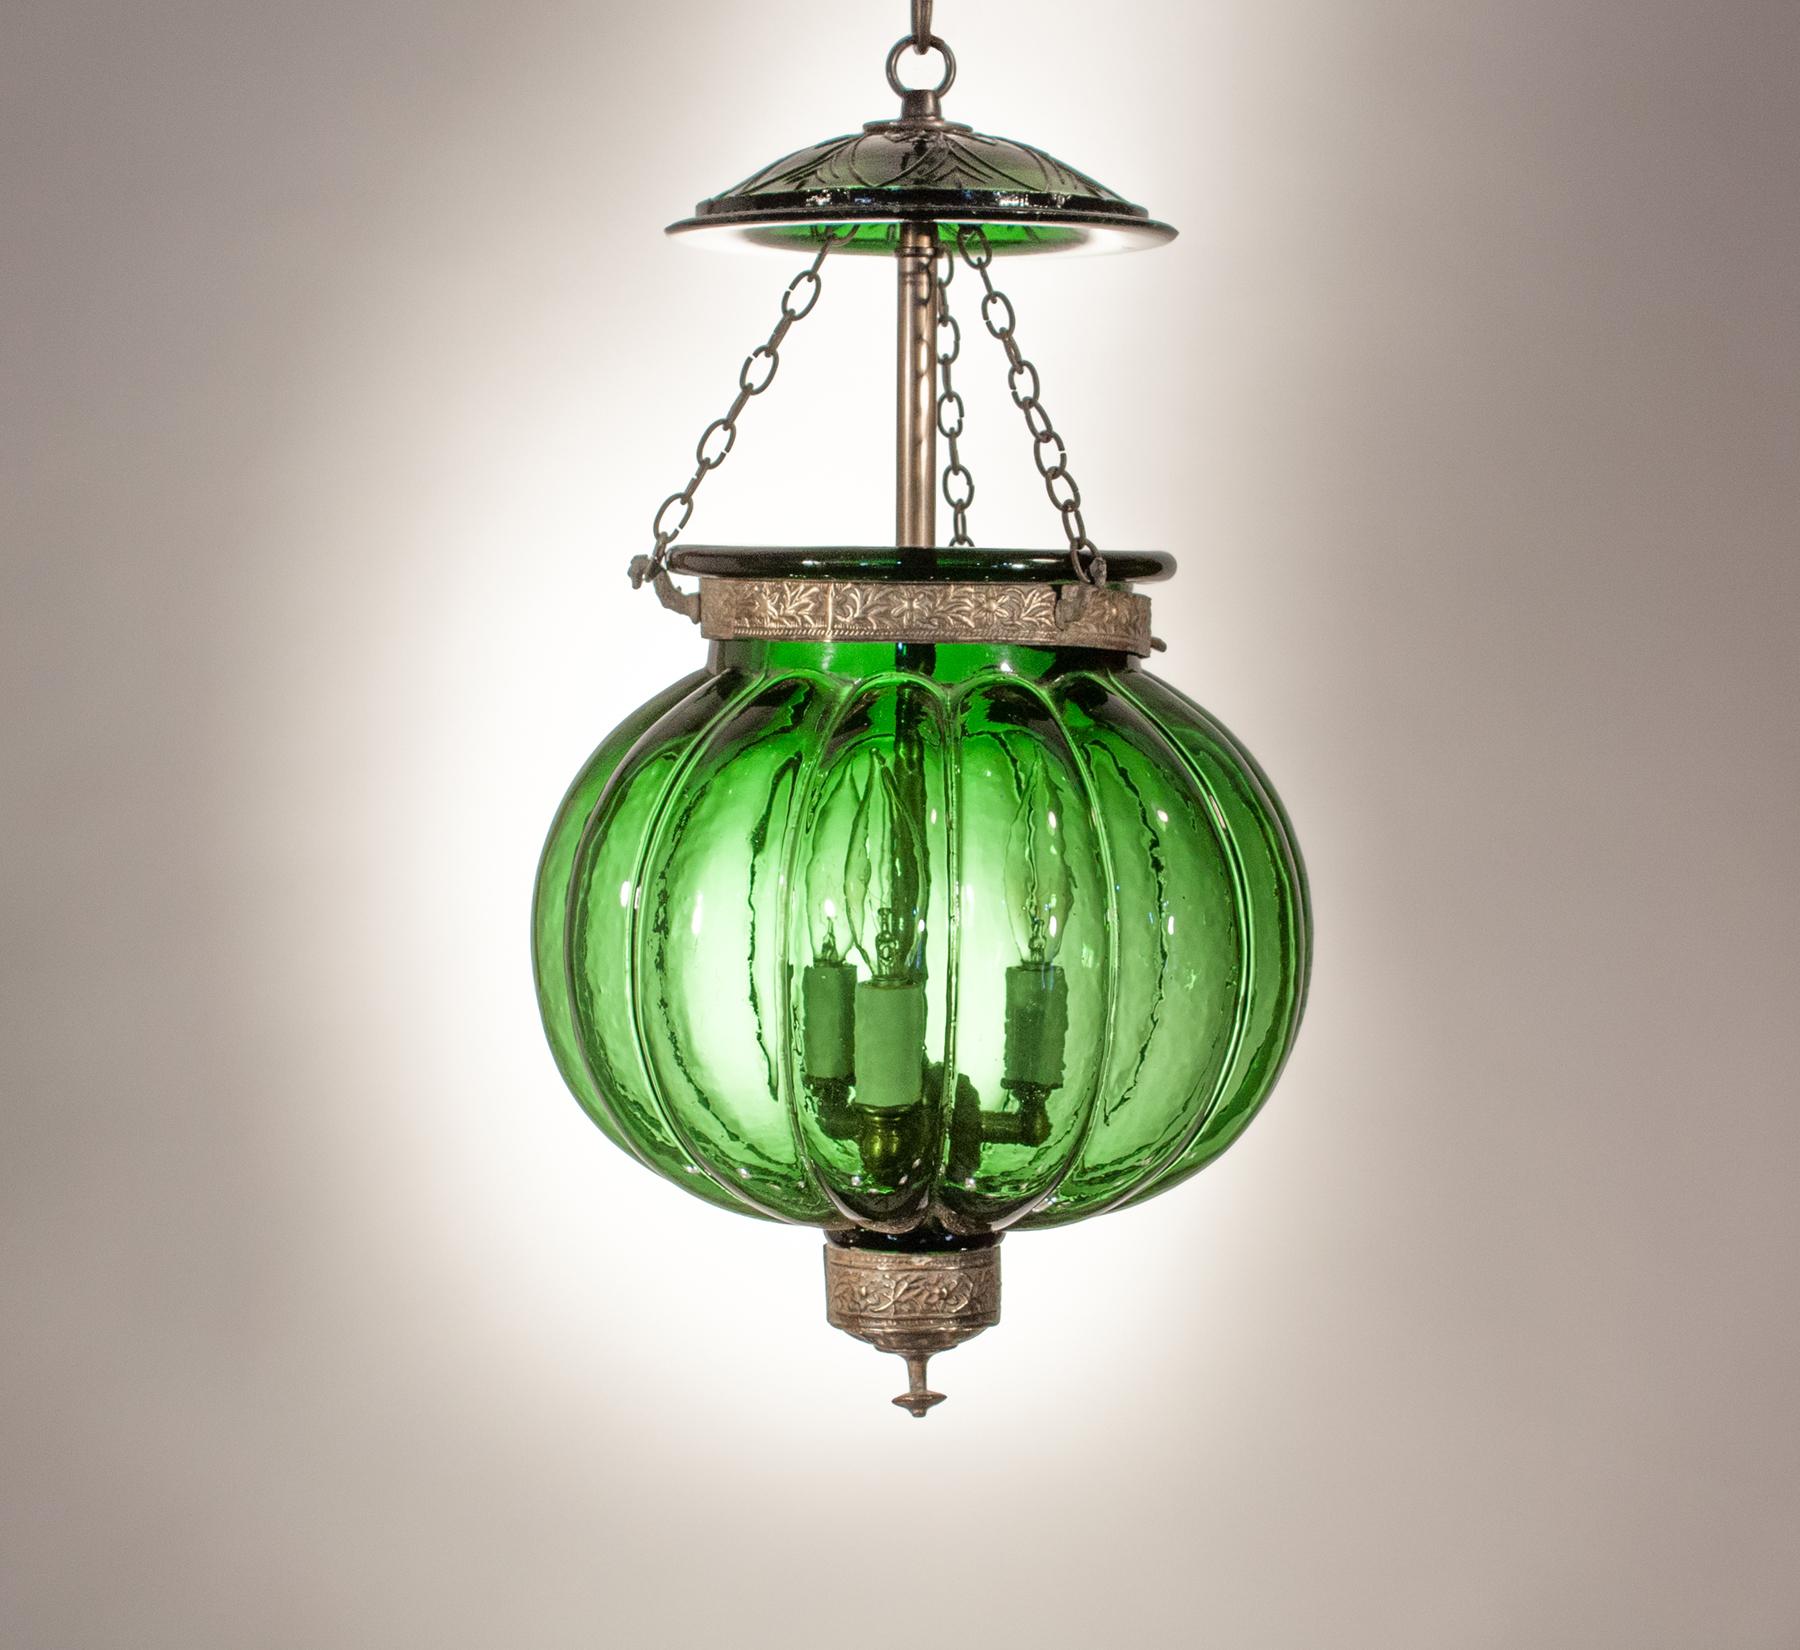 A rare 19th century Belgian green glass ribbed melon or pumpkin lantern hand blown in Belgium. This circa 1890 heirloom is in very good condition and has its original press glass smoke lid and brass details, including a canted finial (see image #11)